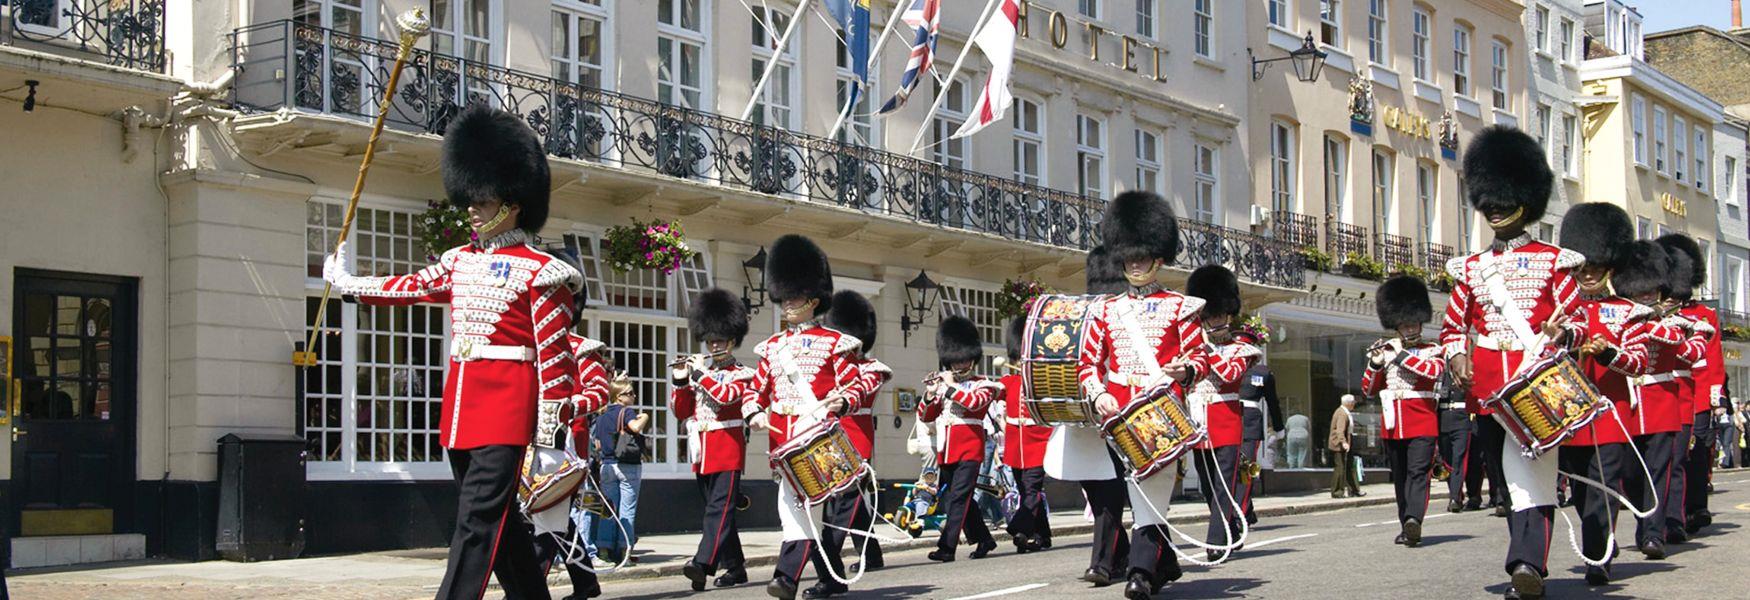 The Guard March on Windsor High Street